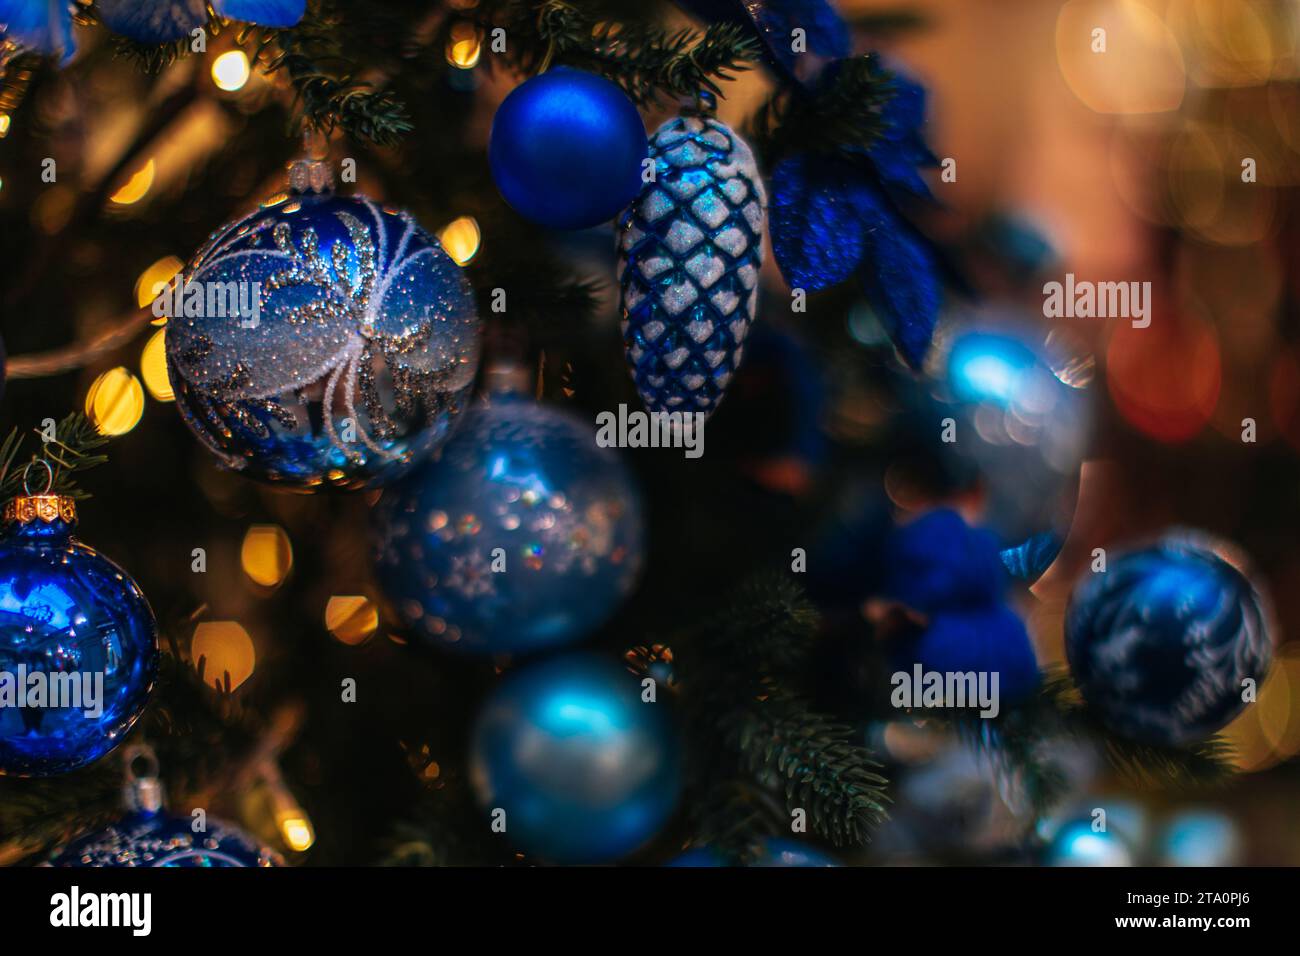 Bright blue Christmas ball with silver ornament hanging on the Christmas tree with golden garland lights. Decorated spruce branches. Stock Photo